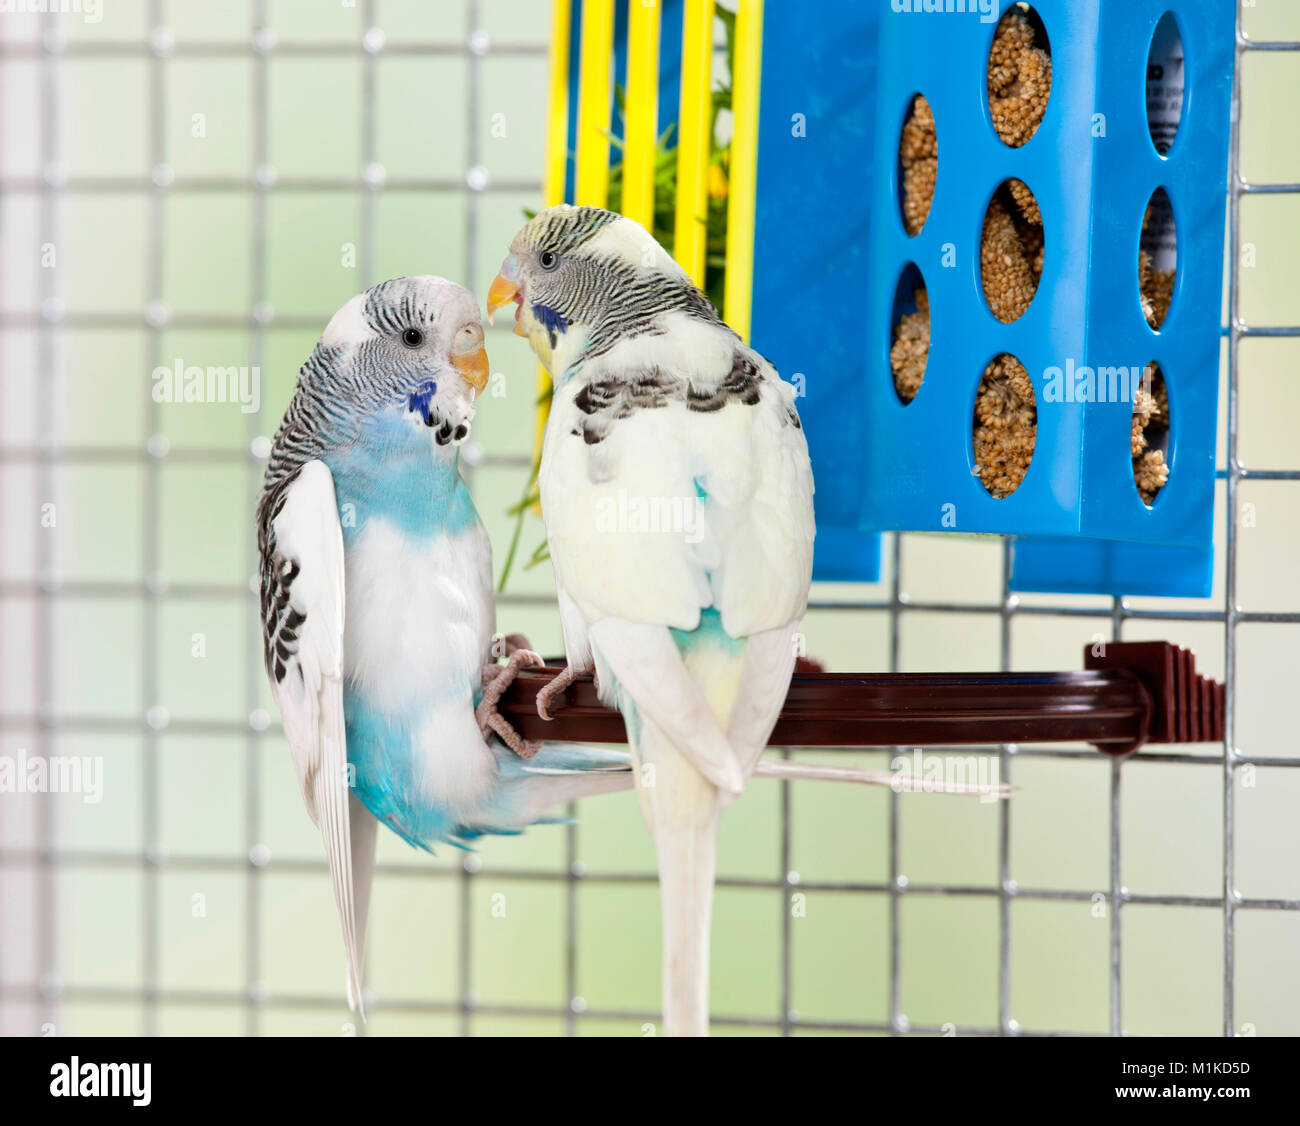 Budgerigar, Budgie (Melopsittacus undulatus). Two birds squabbling next to a food container. Germany Stock Photo